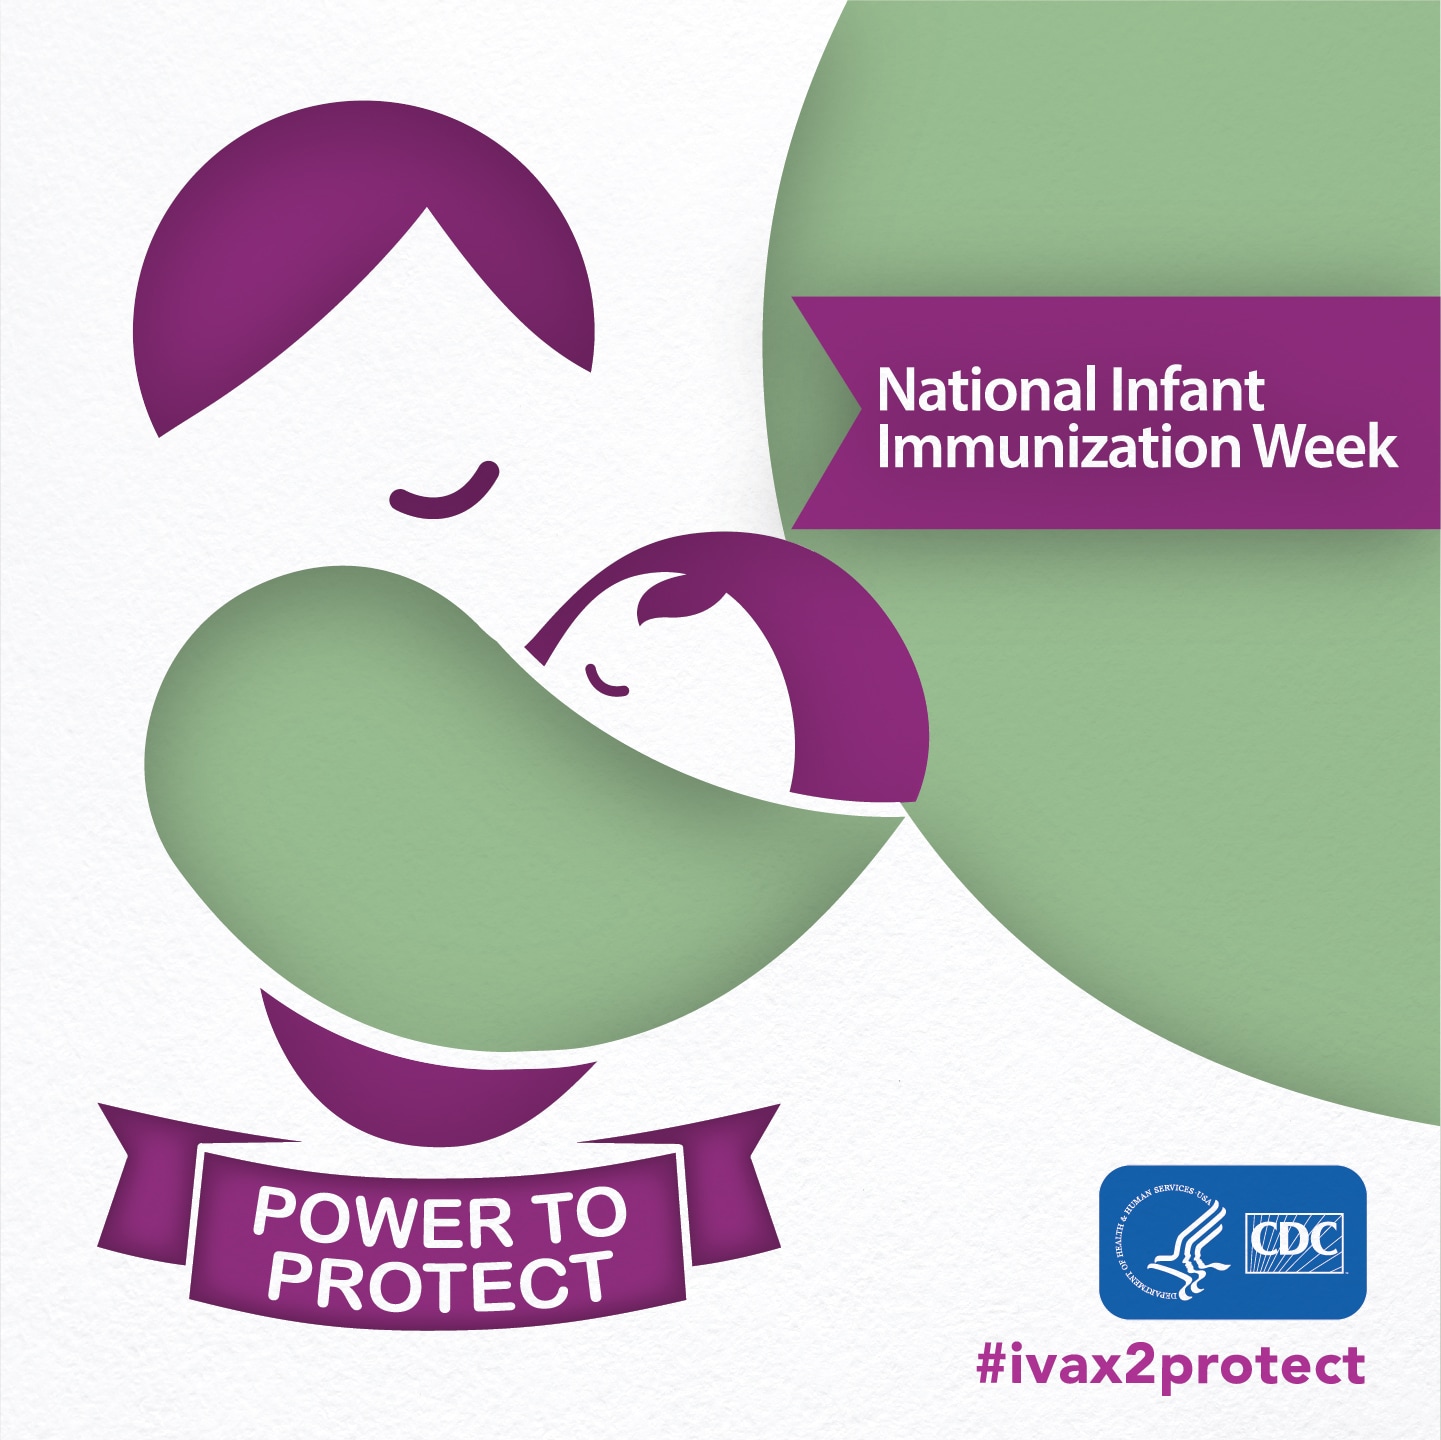 #ivax2protect prevention